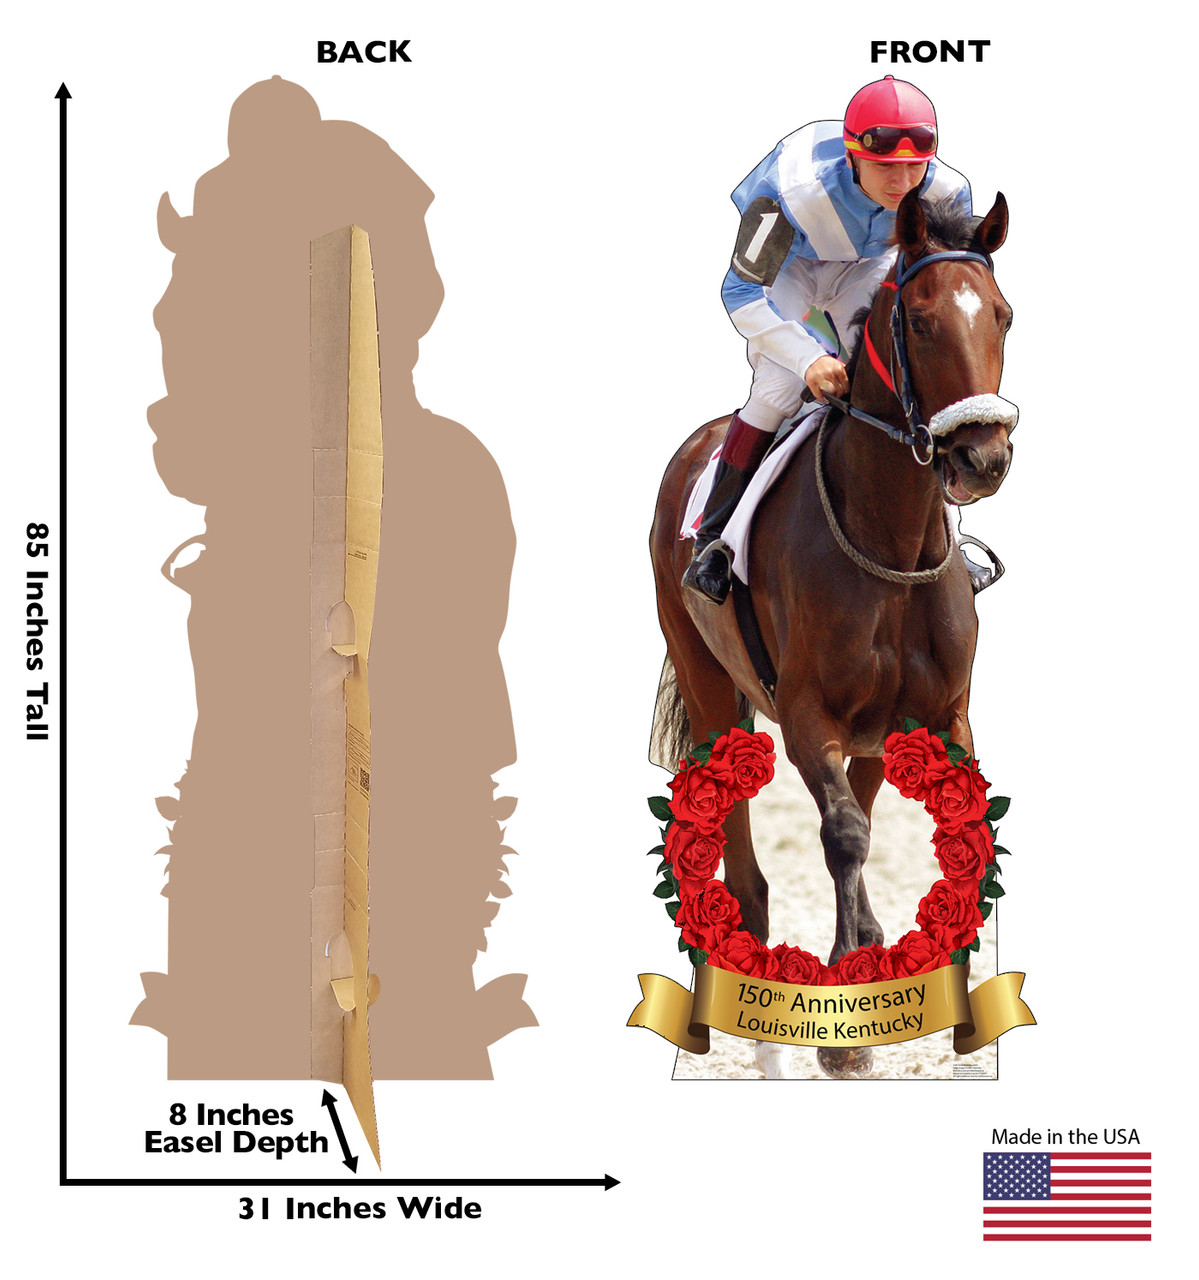 Life-size cardboard standee of a Horse & Jockey 150 yr. Anniversary with back and front dimensions.